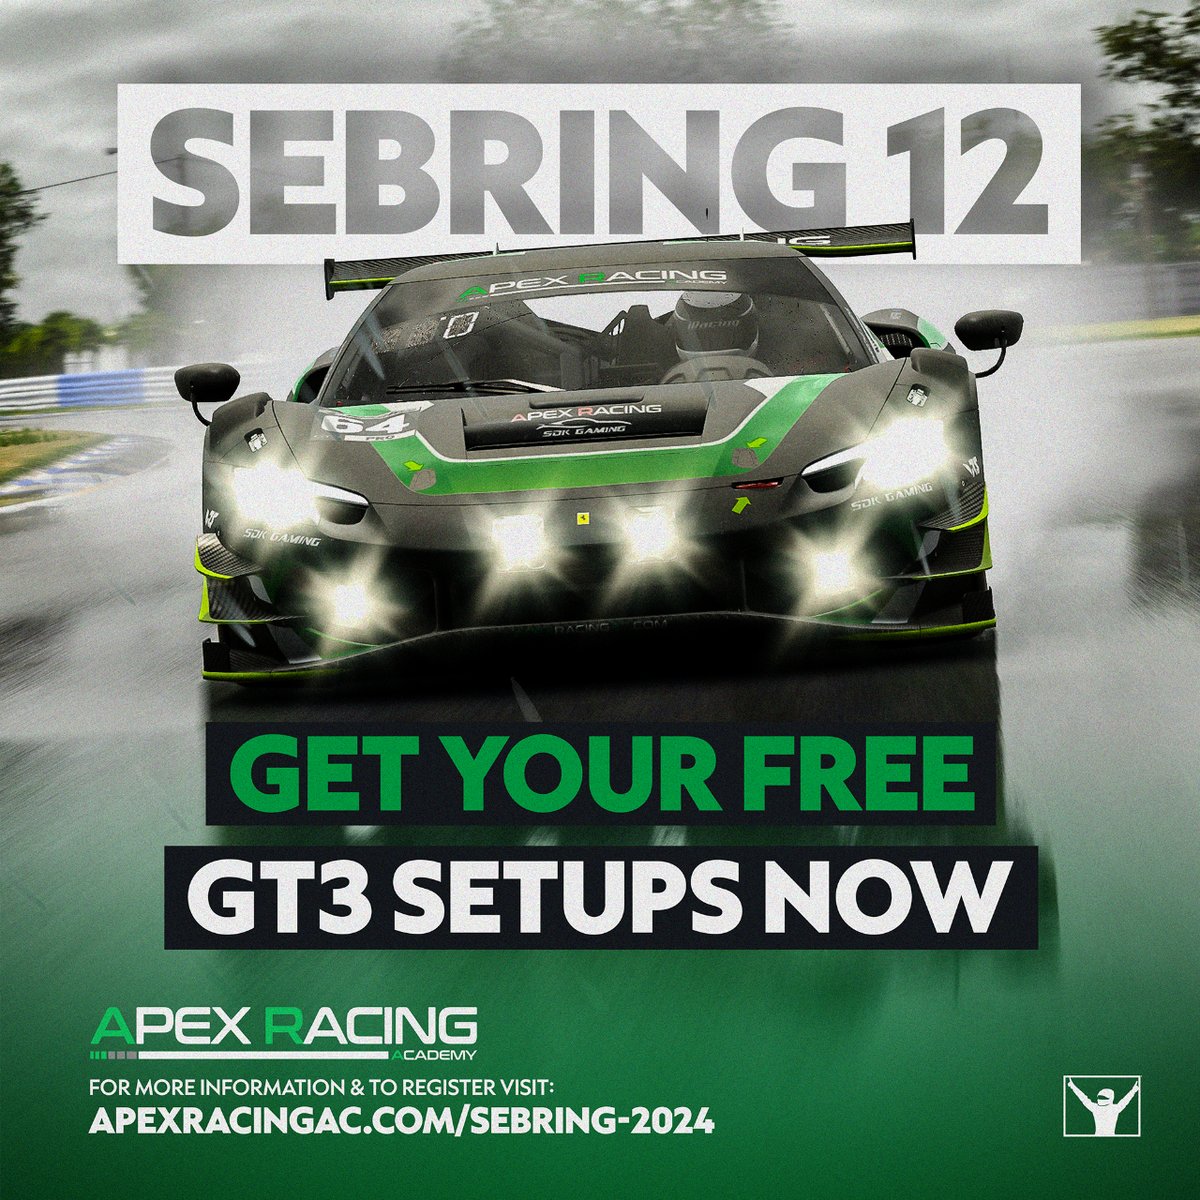 The @iRacing Sebring 12 is just around the corner! 🇺🇸 ✅ Free GT3 setups for wet & dry ✅ EXCLUSIVE video track guide 💸 35% discount code! 🔗 apexracingac.com/sebring-2024/ #apexracingacademy #iracing #simracing